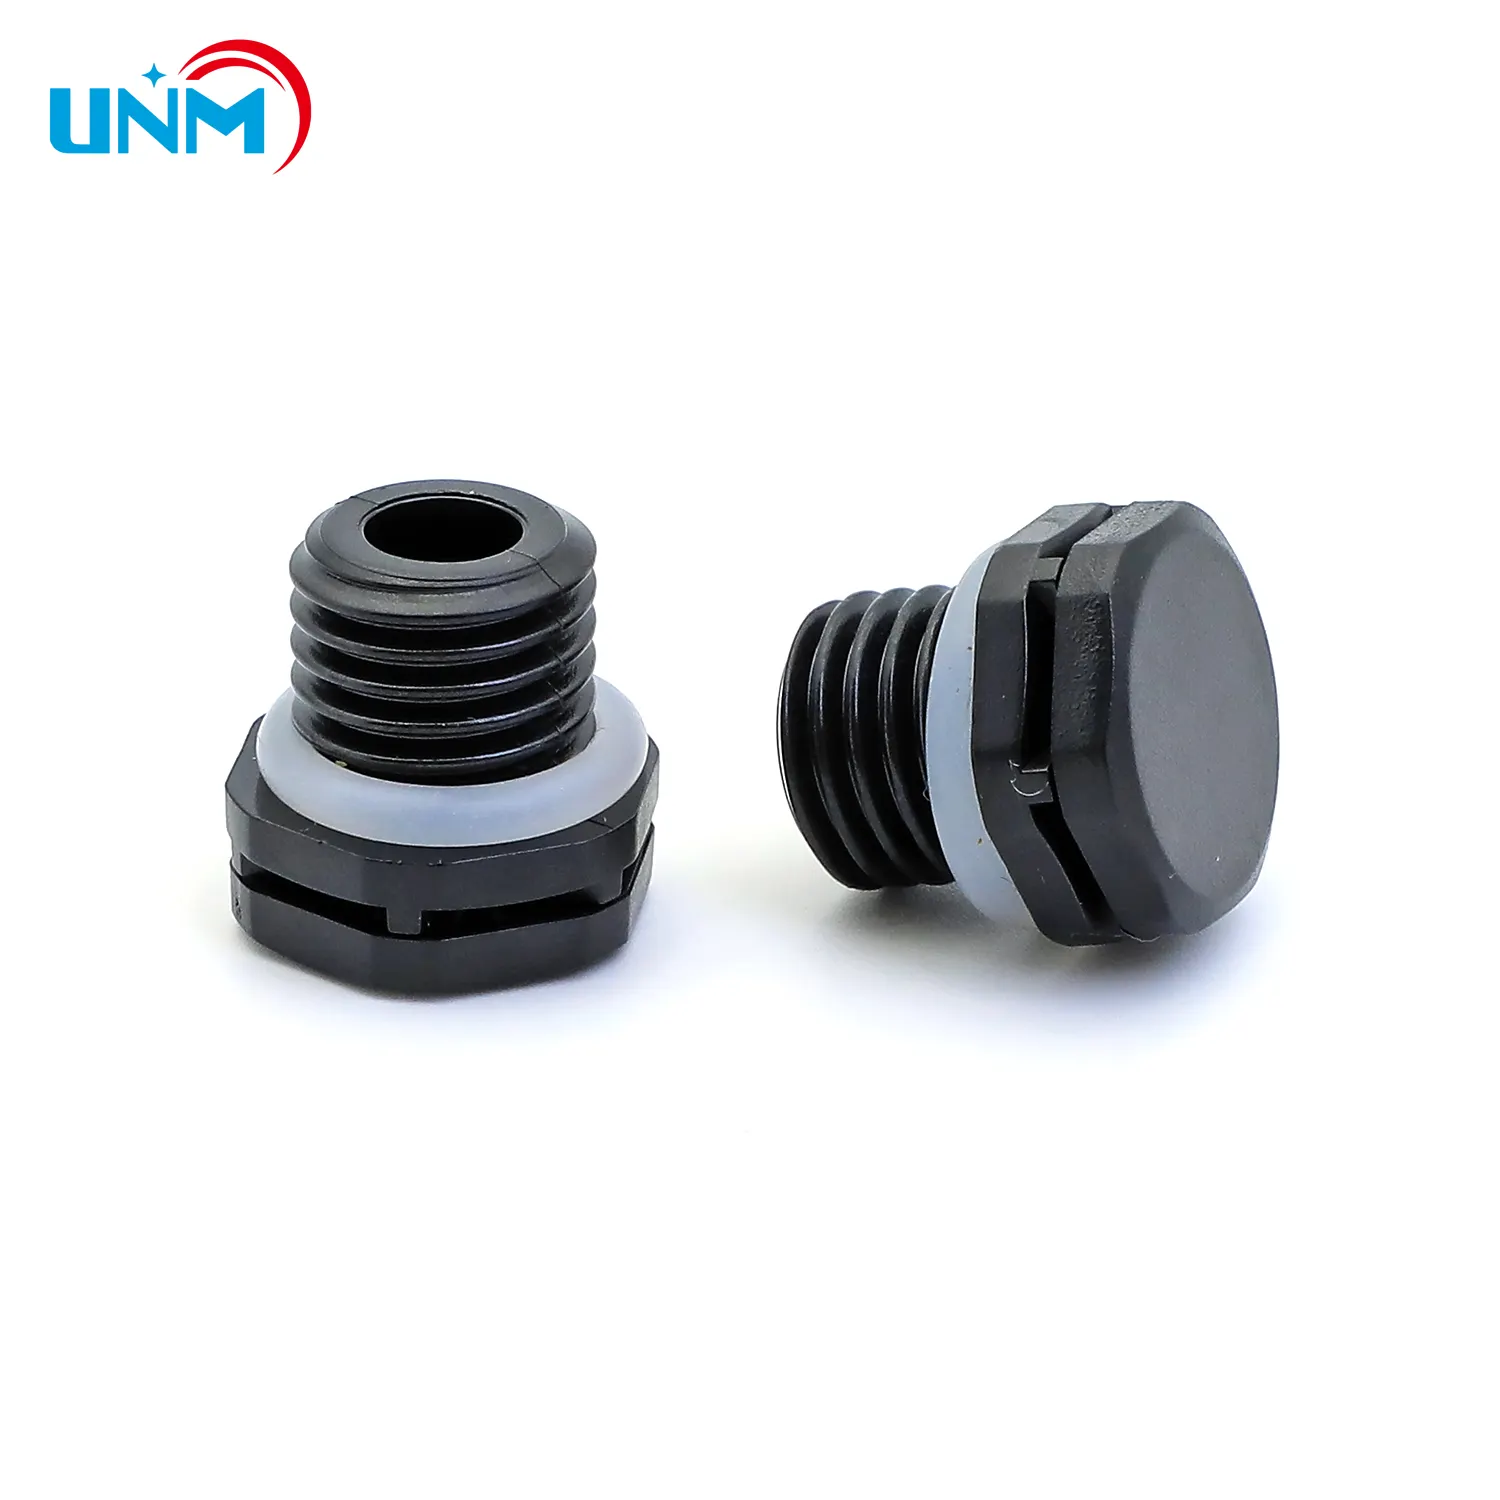 UNM Support Customization Vent Plug Automotive Snap In Vents Waterproof Breathable Vent Valve